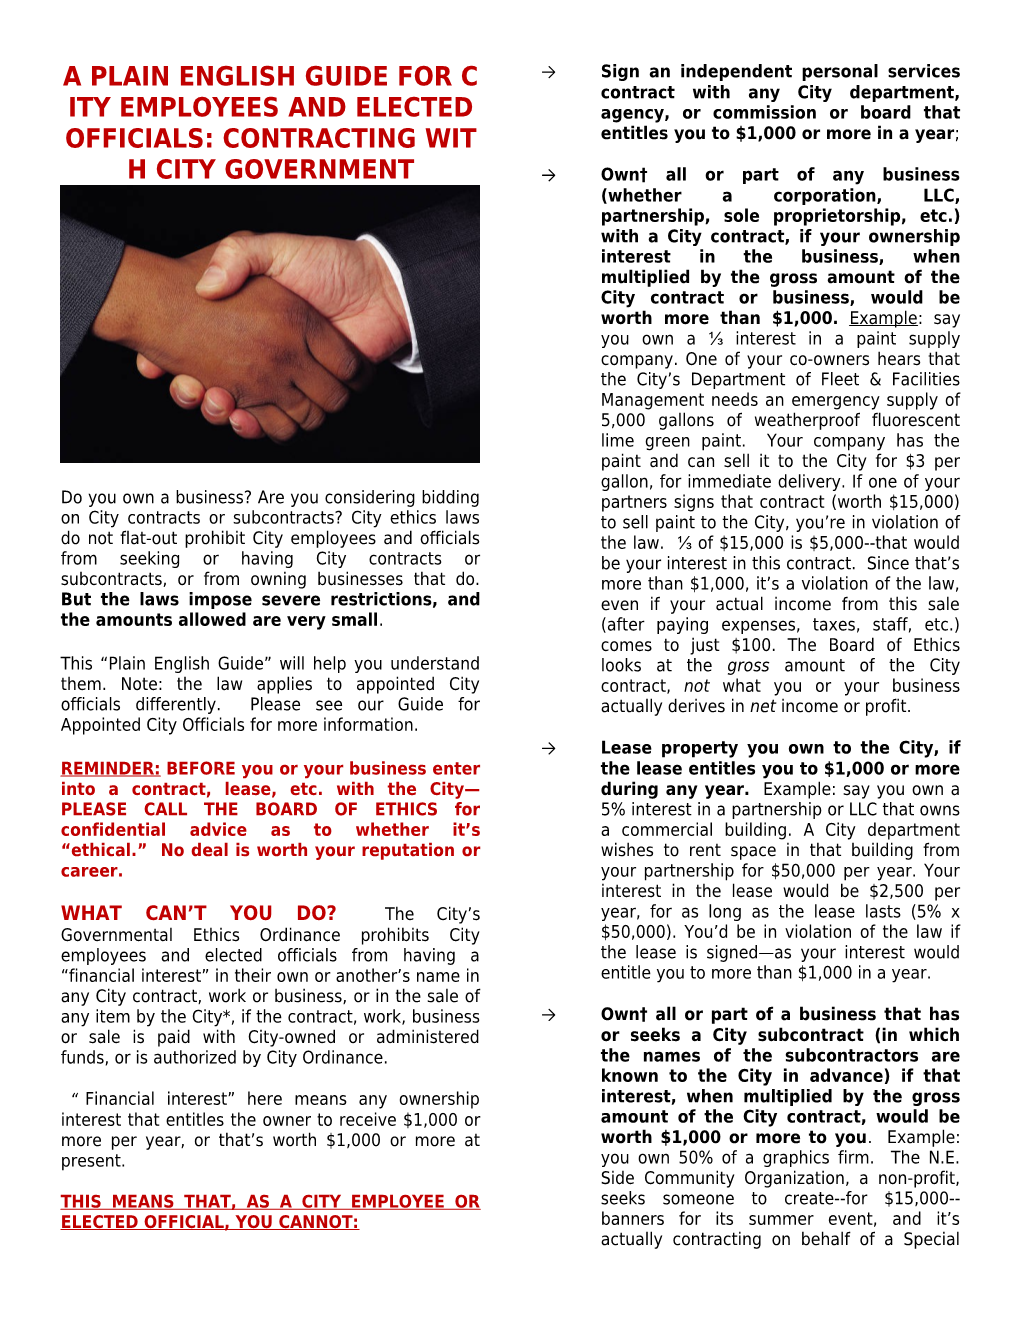 A Plain English Guide for City Employees and Elected Officials: Contracting with City